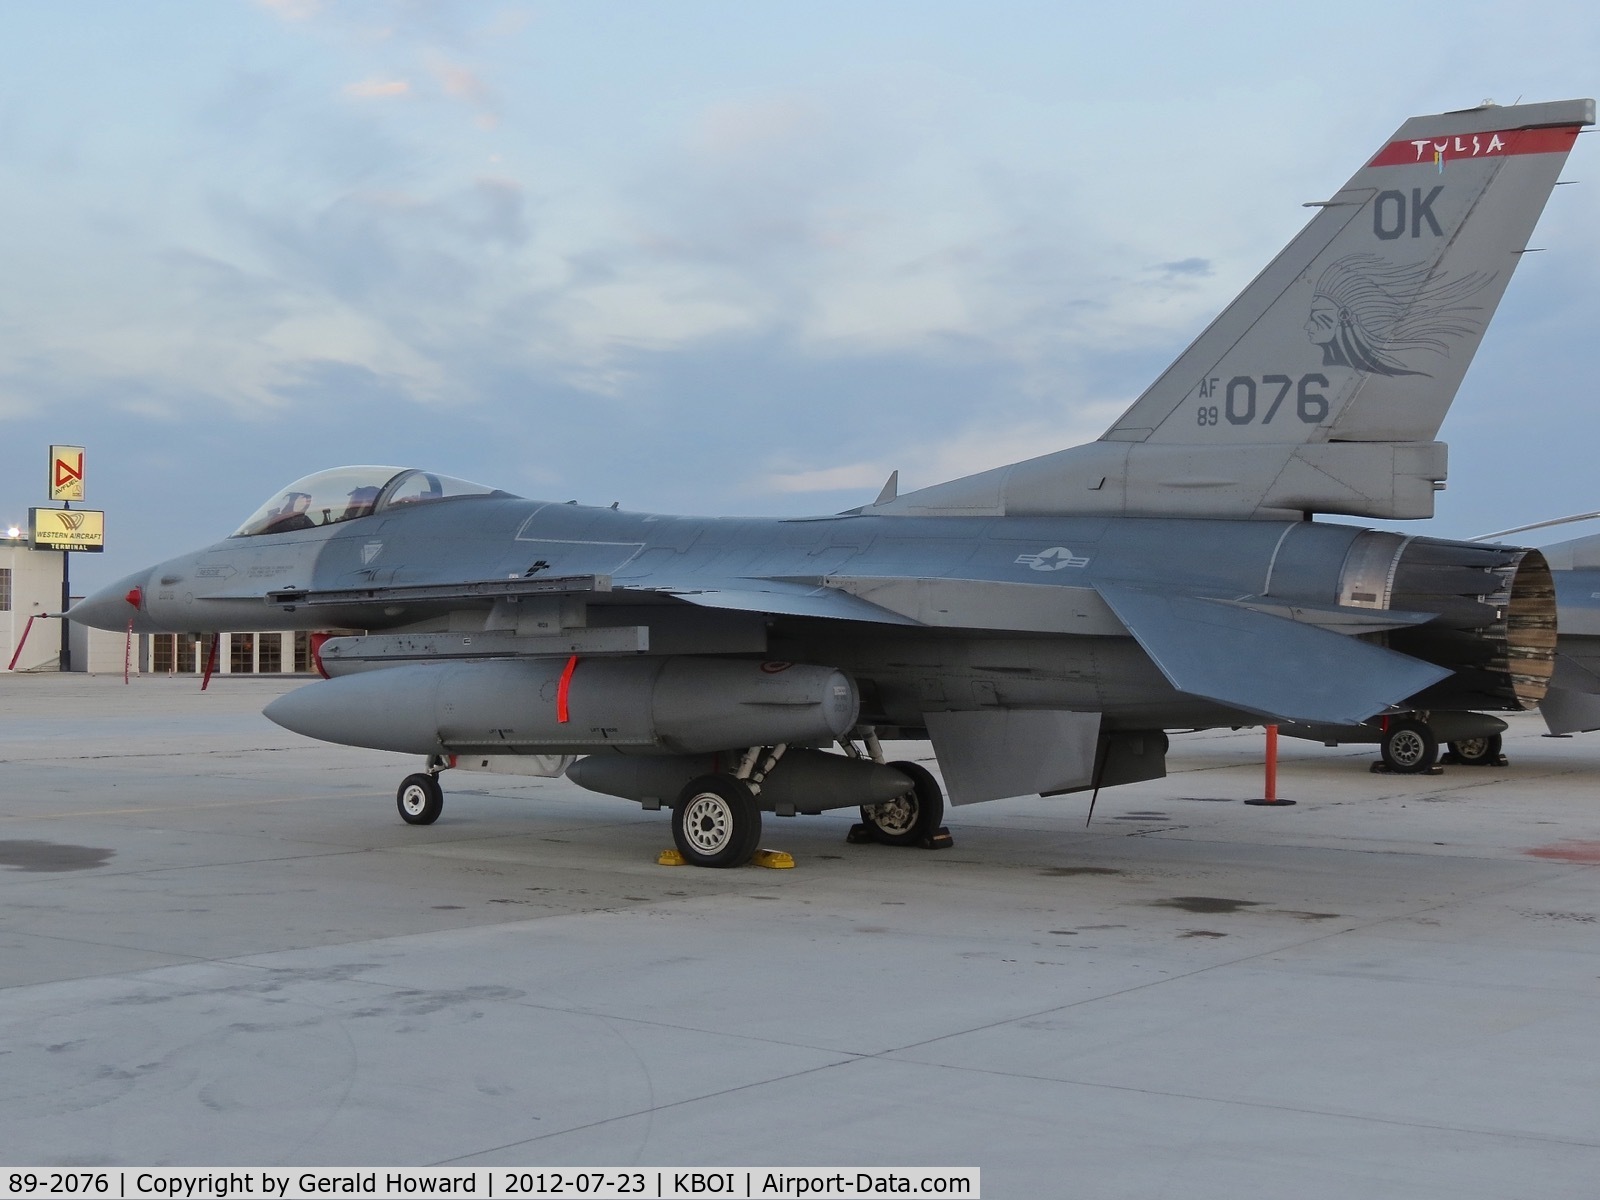 89-2076, General Dynamics F-16C Fighting Falcon C/N 1C-229, Parked on the south GA ramp. 138th FW, OK ANG.